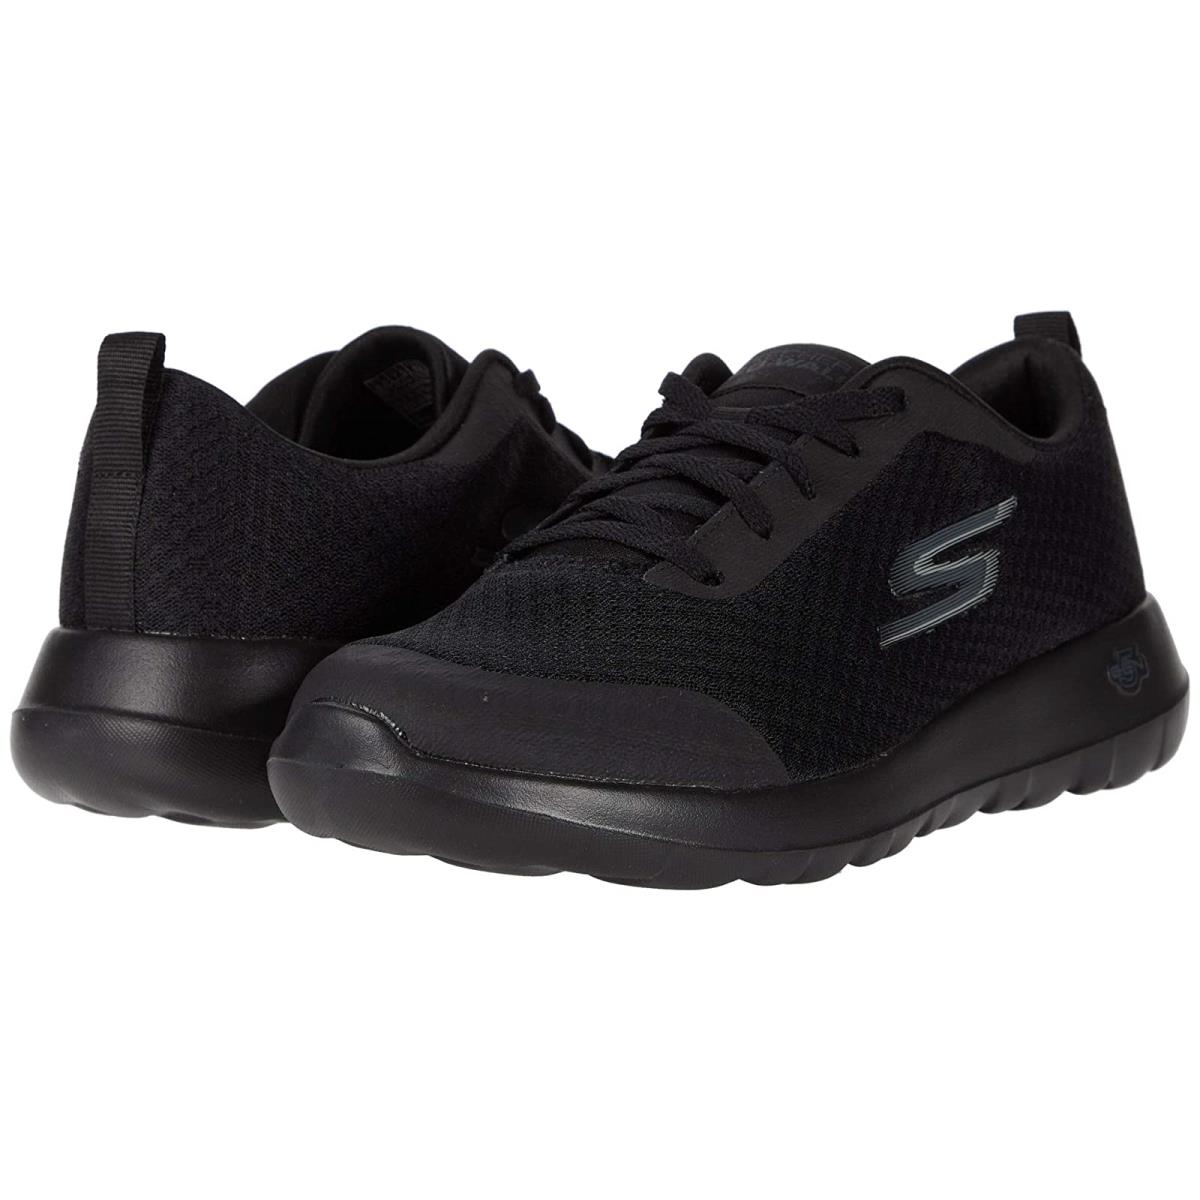 Man`s Sneakers Athletic Shoes Skechers Performance Go Walk Max Black 1